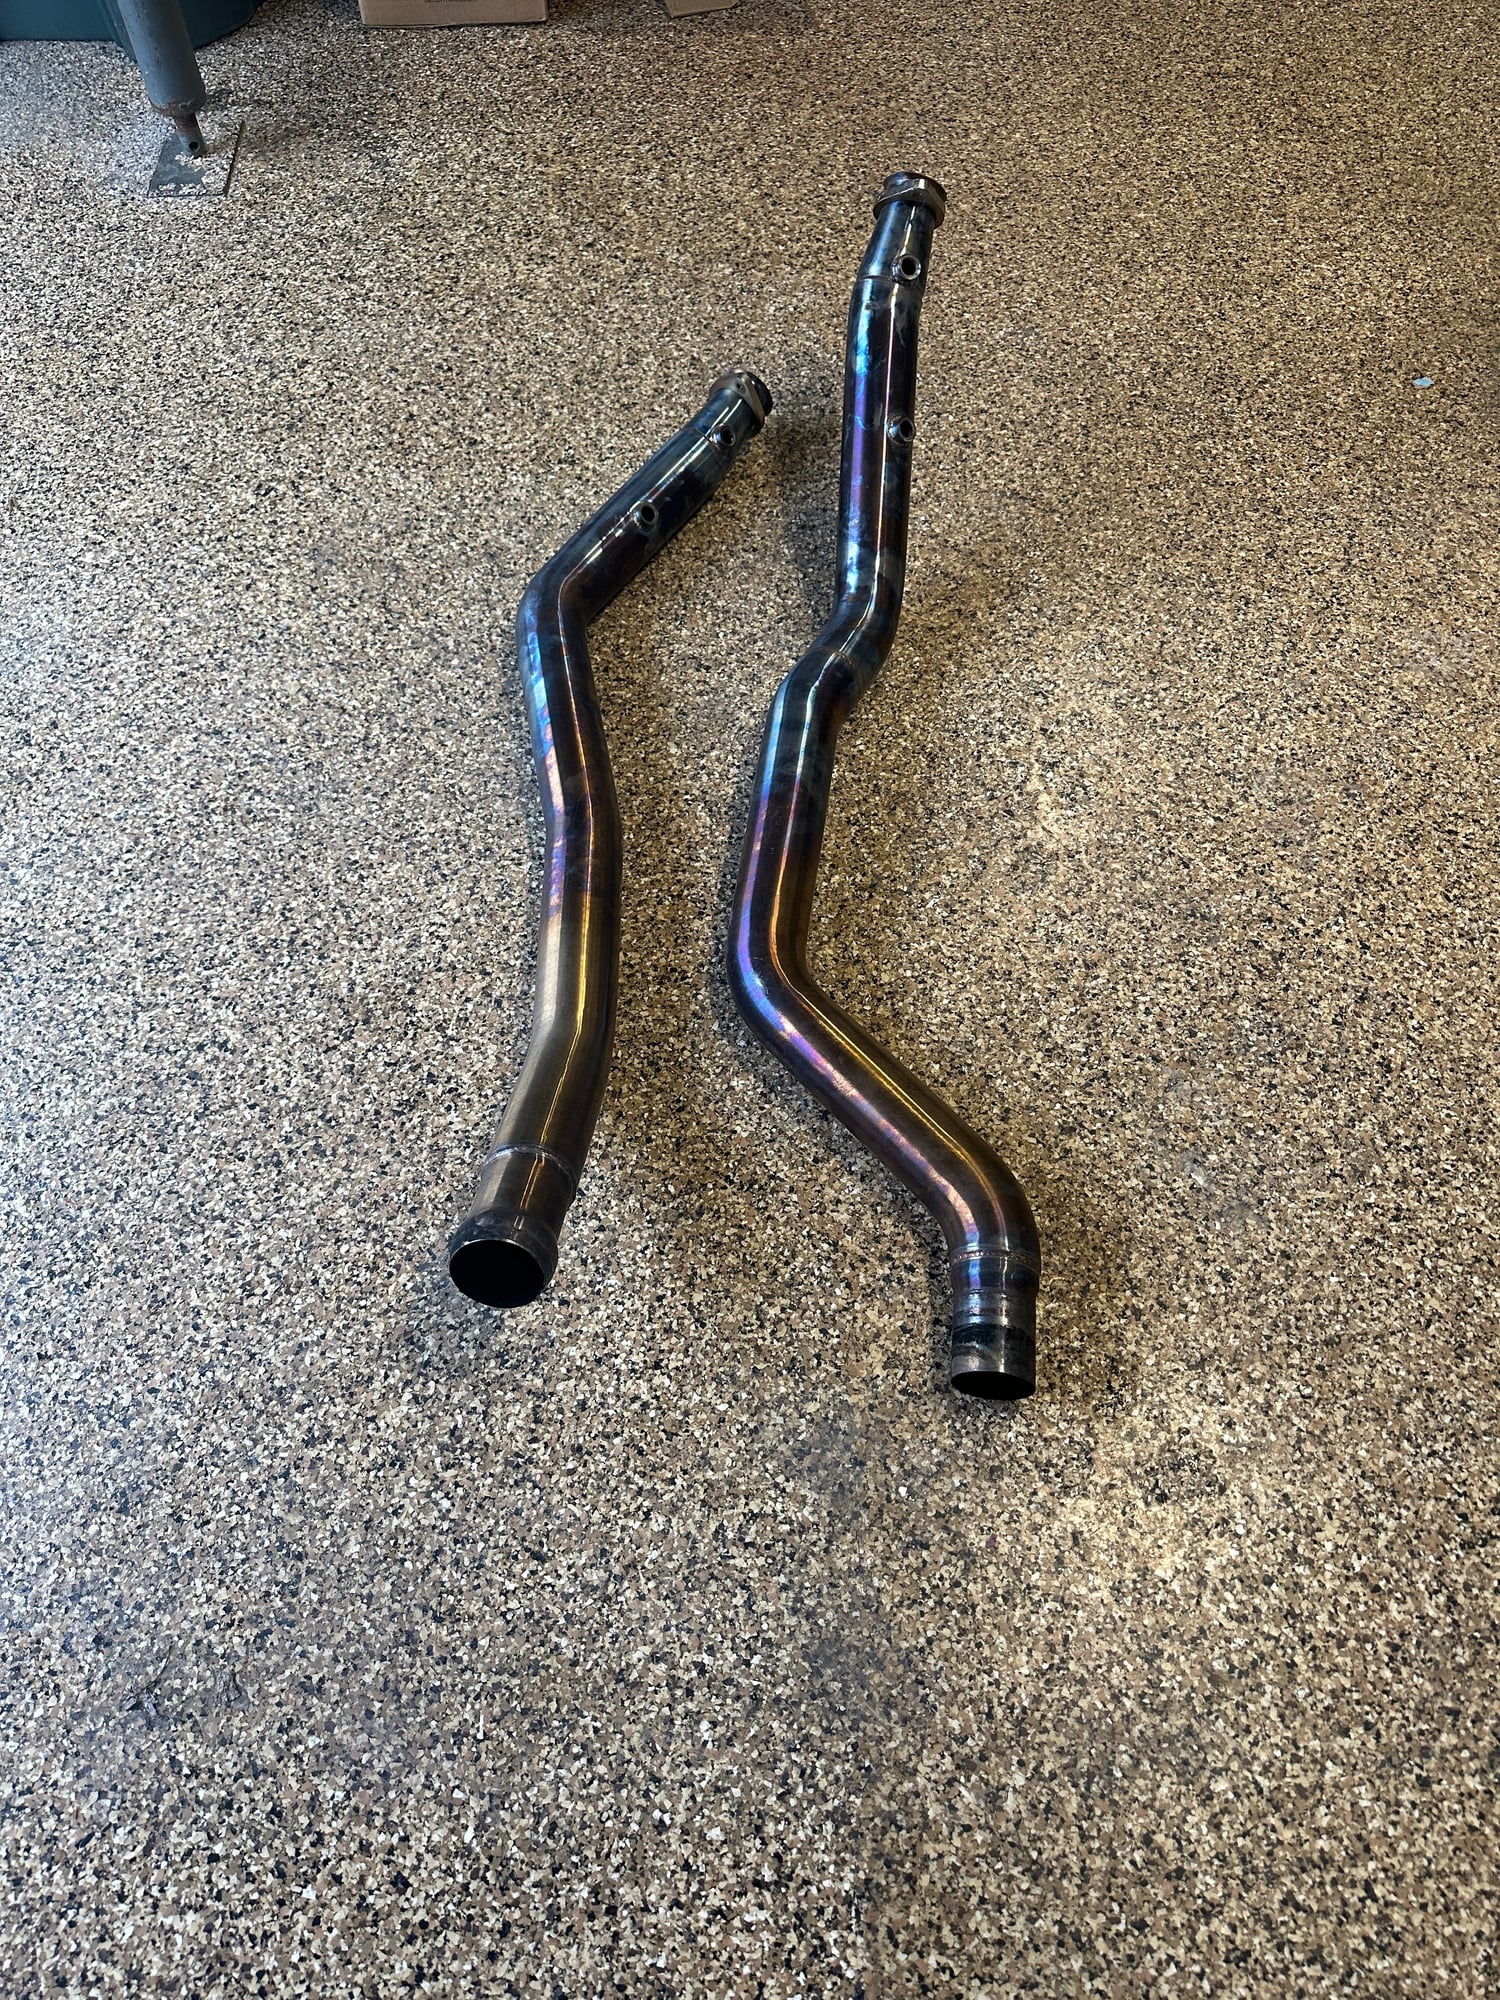 Engine - Exhaust - ML63 Dowbpipes - Used - 2013 to 2016 Mercedes-Benz ML63 AMG - New Cumberland, PA 17070, United States